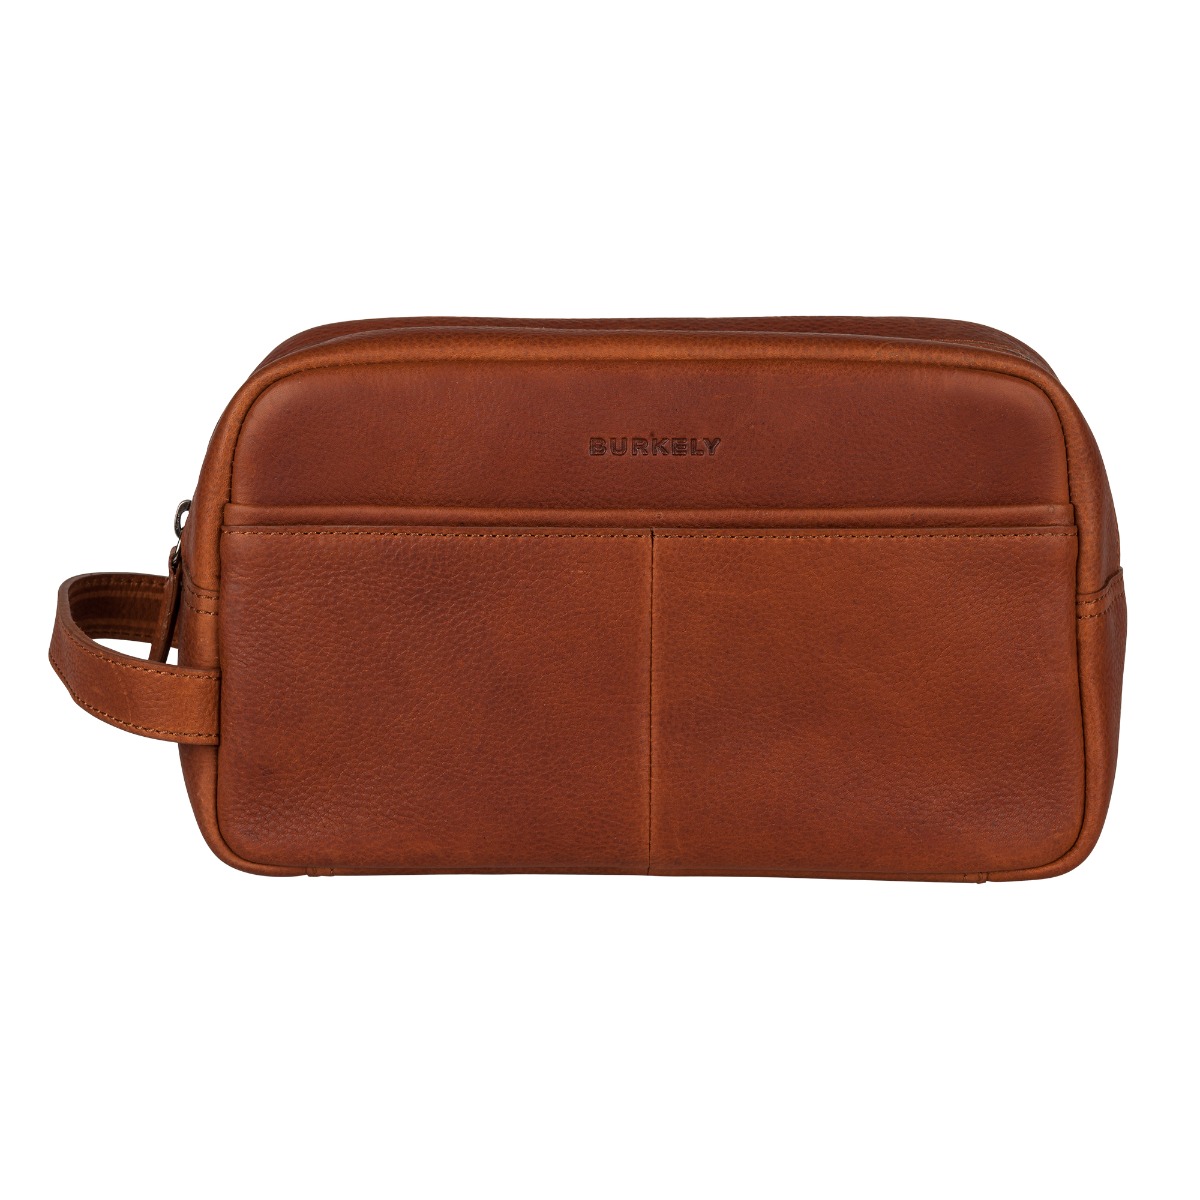 Burkely Antique Avery Toiletry Bag Cognac